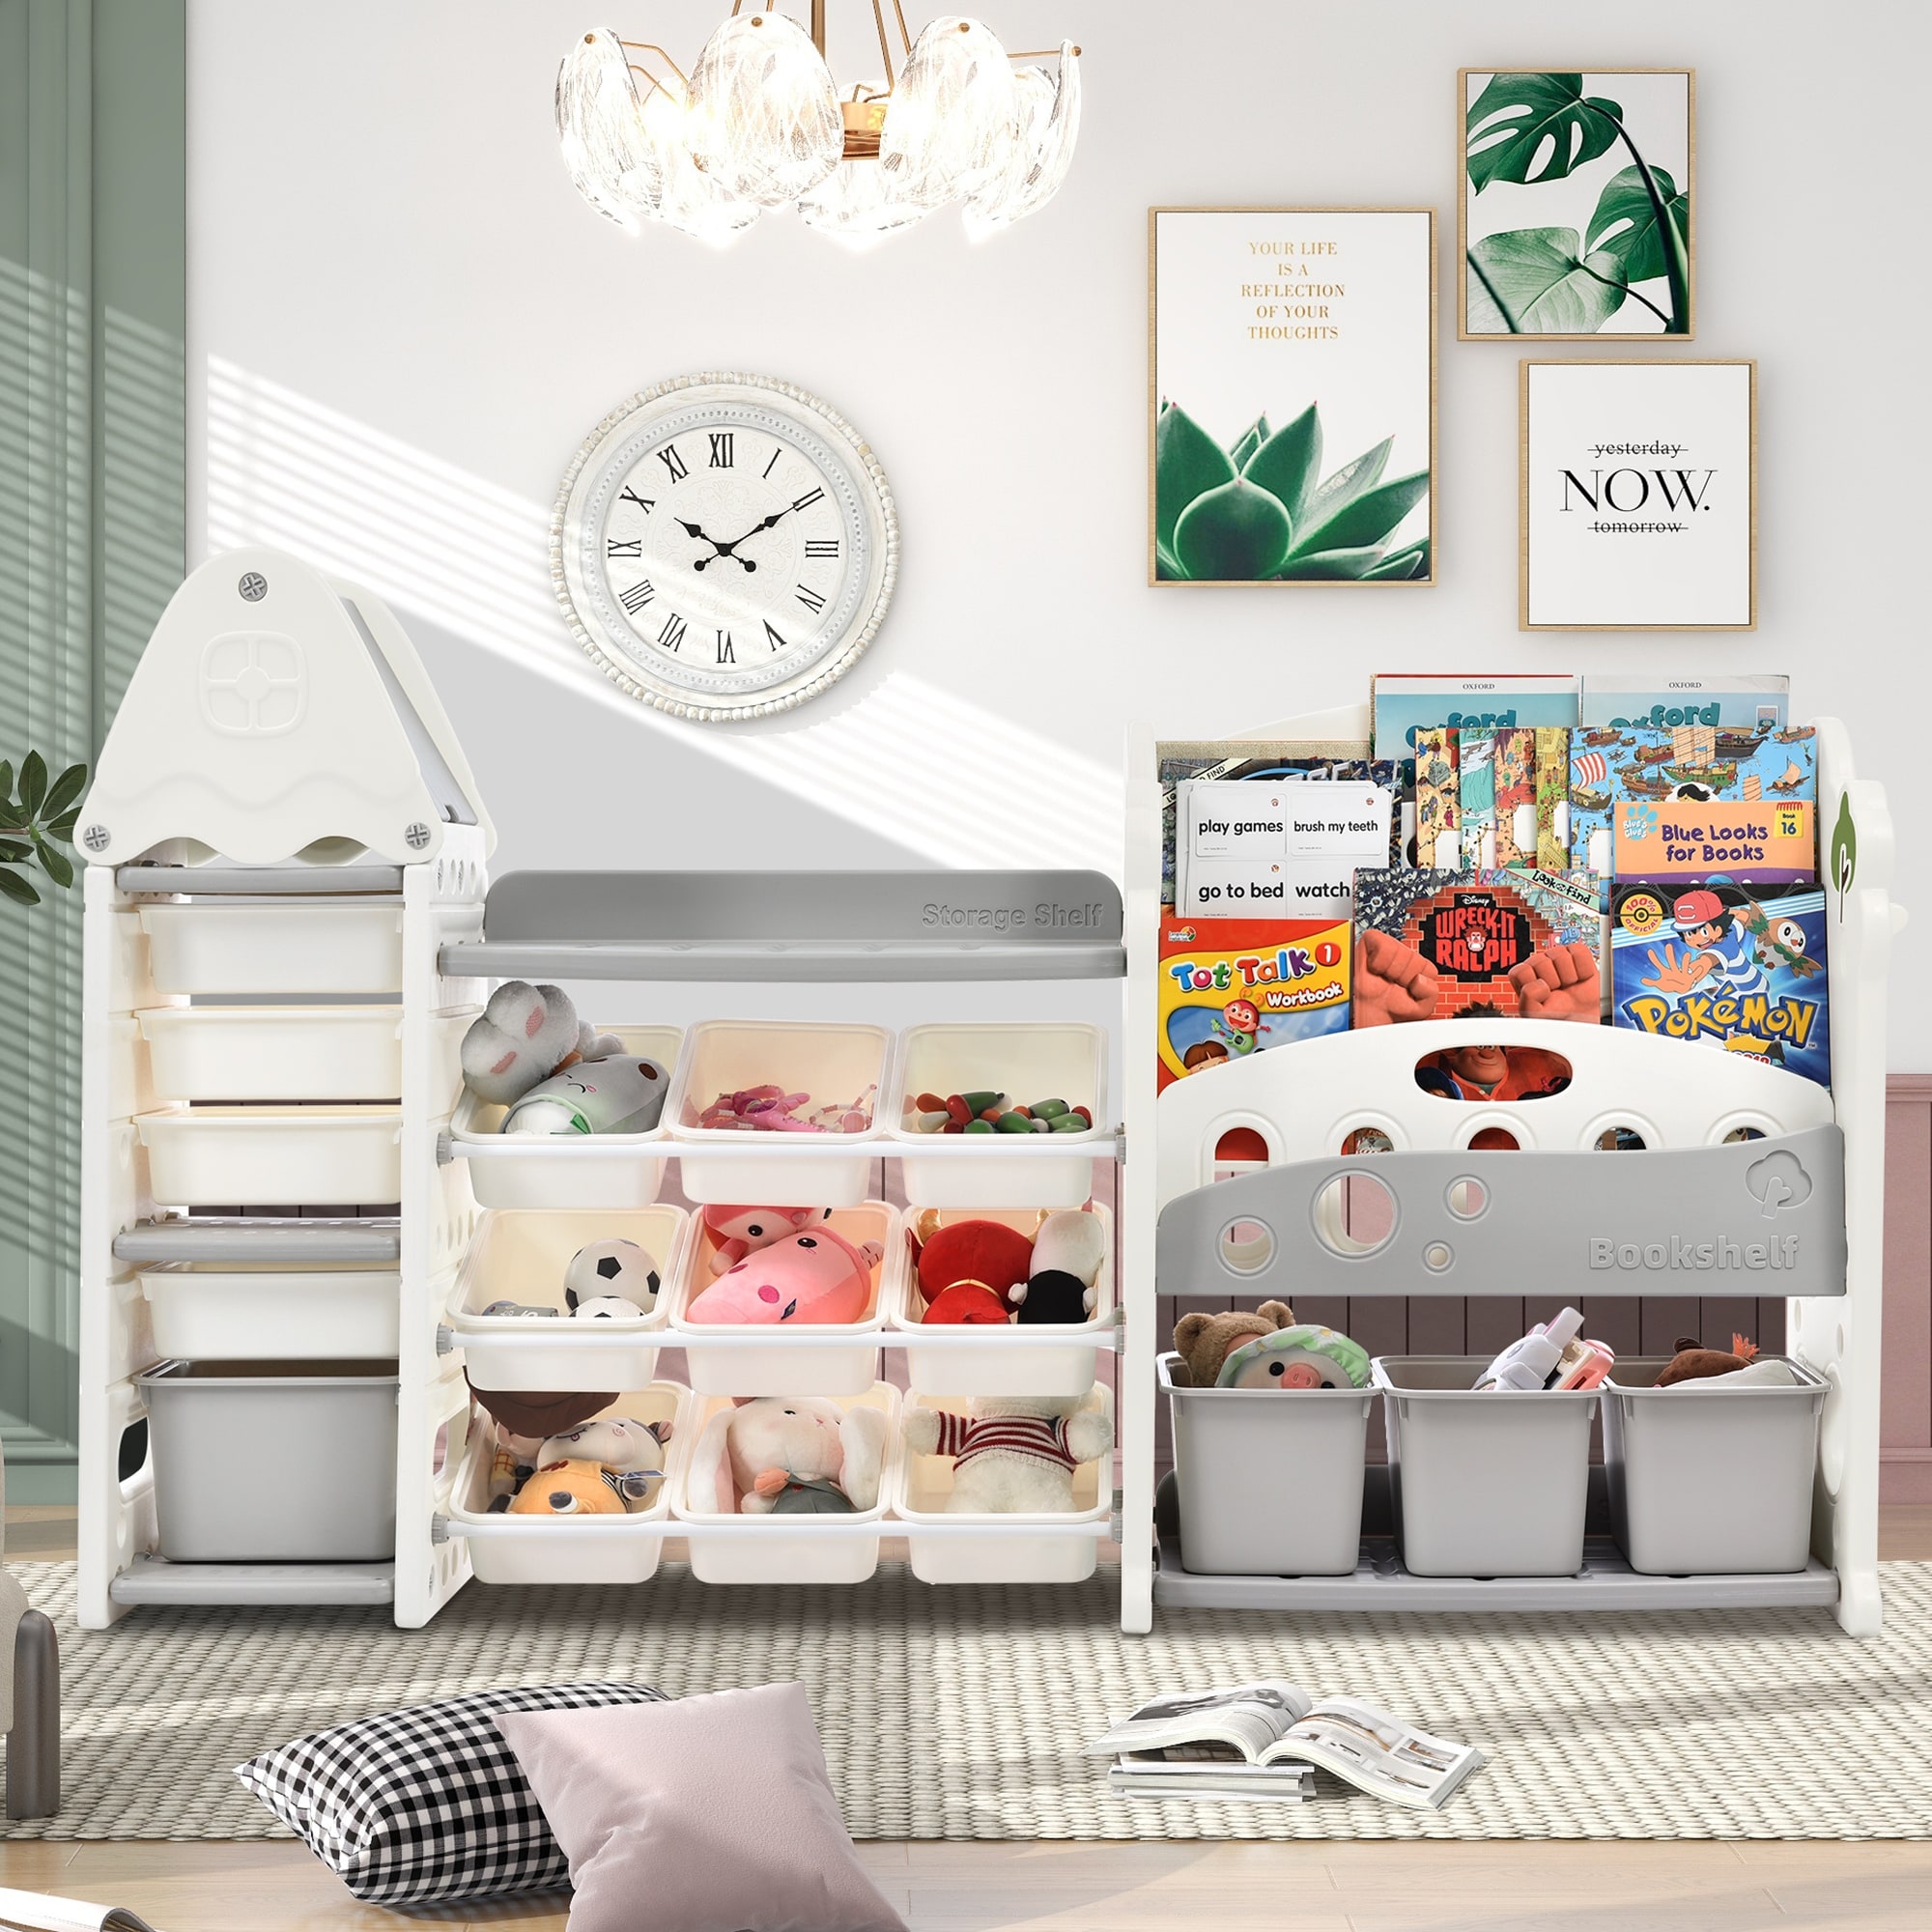 https://ak1.ostkcdn.com/images/products/is/images/direct/3d149719970737aba1d280370c3b92a0ea41ce54/Multi-functional-Kids-Bookshelf-Toy-Storage-Organizer-with-12-Bins-and-4-Bookshelves.jpg